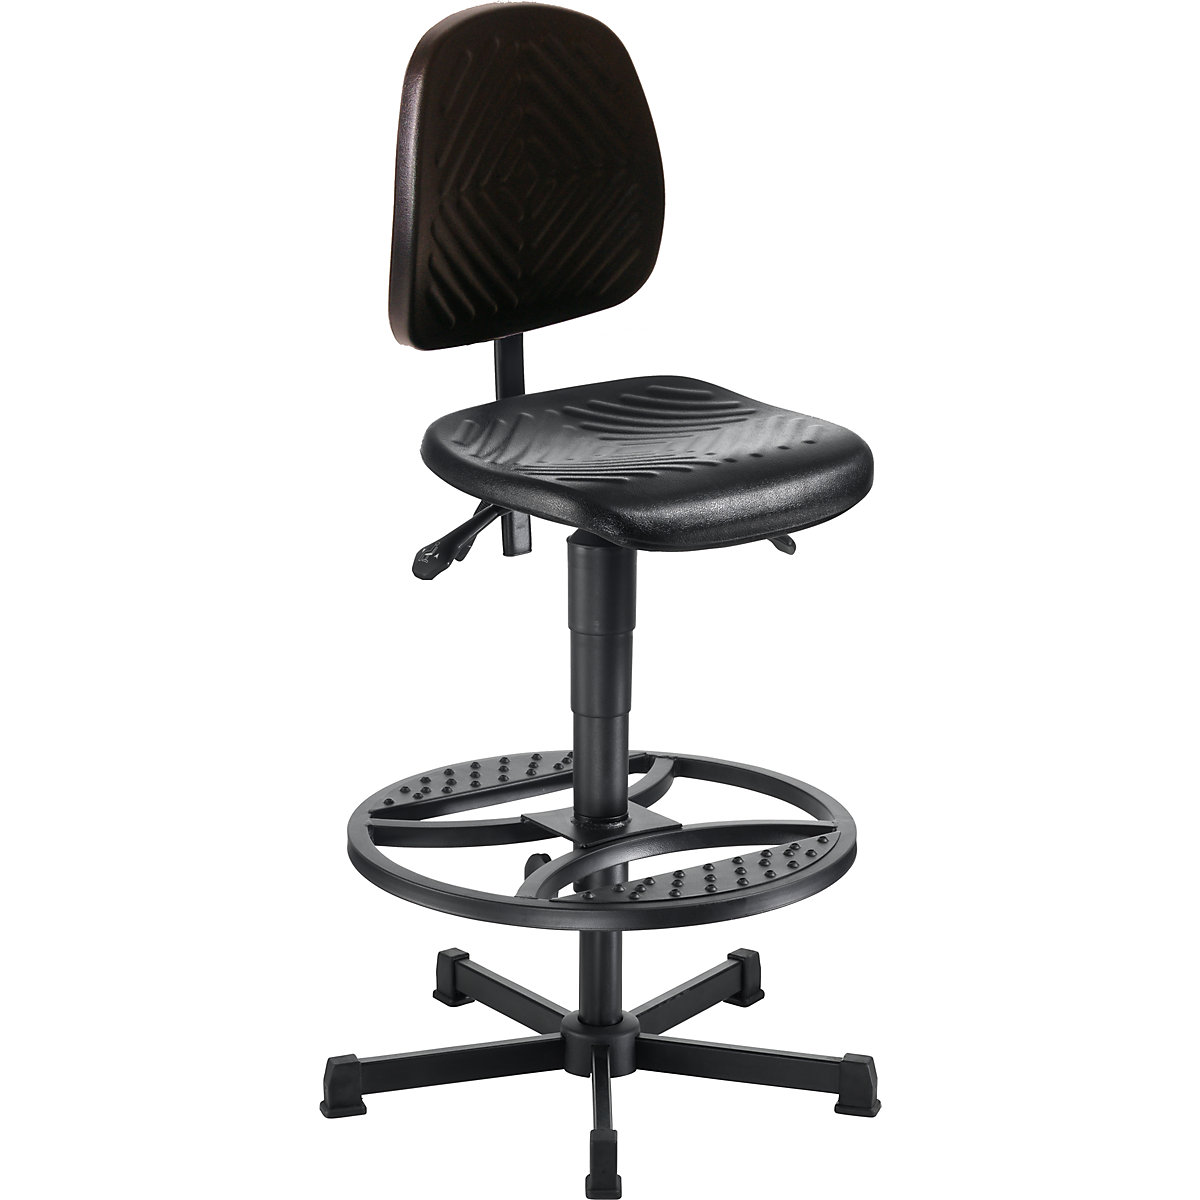 Industrial swivel chair, polyurethane upholstery, gas lift height adjustment – meychair